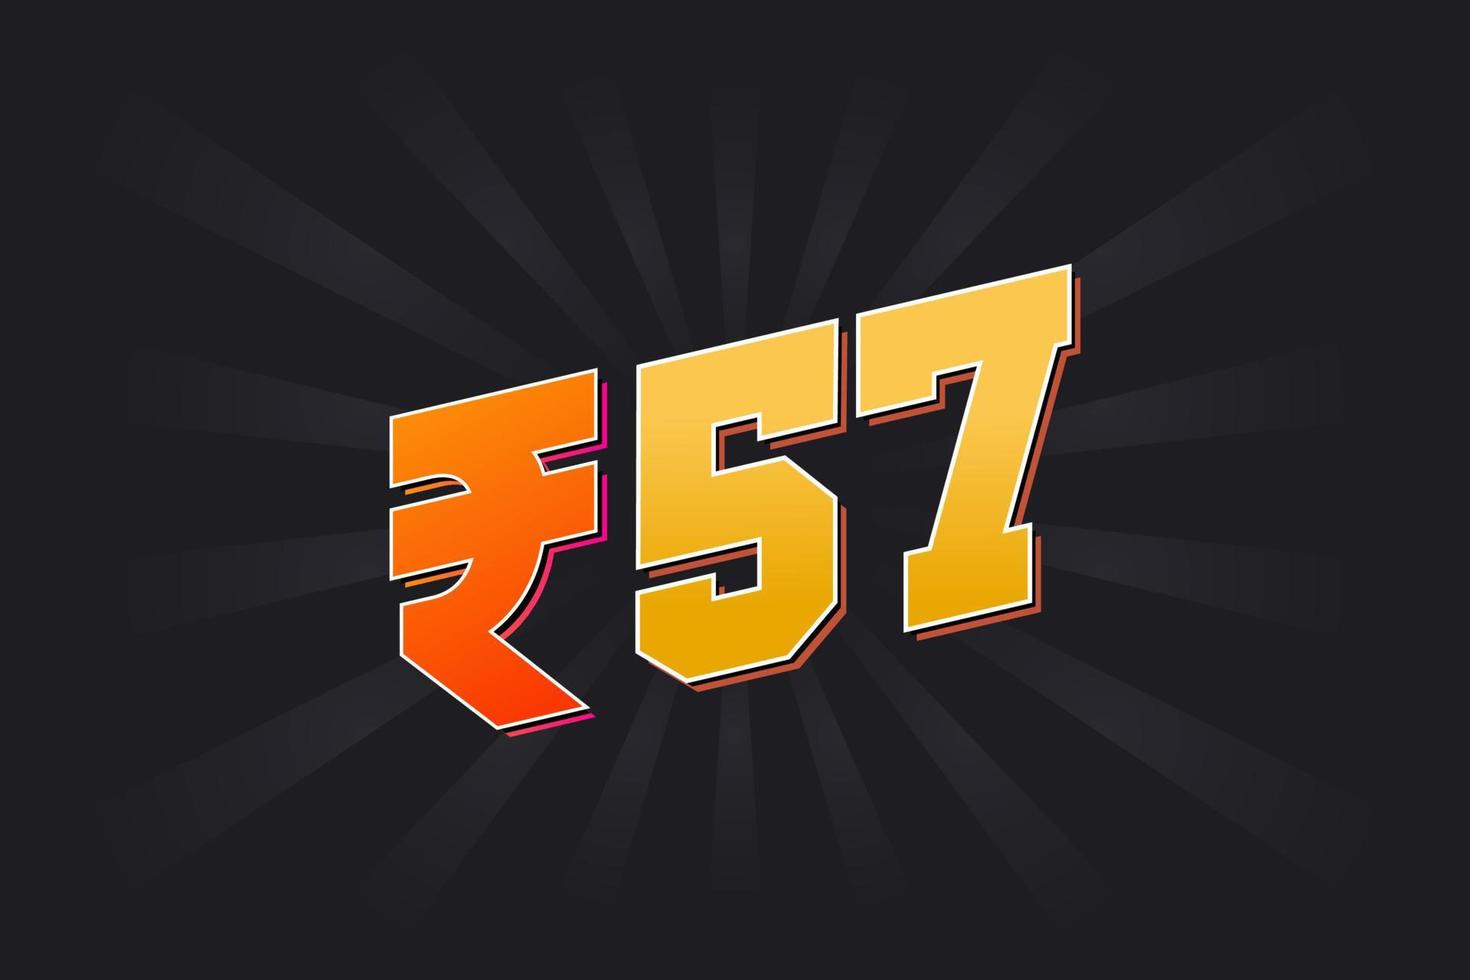 57 Indian Rupee vector currency image. 57 Rupee symbol bold text vector illustration